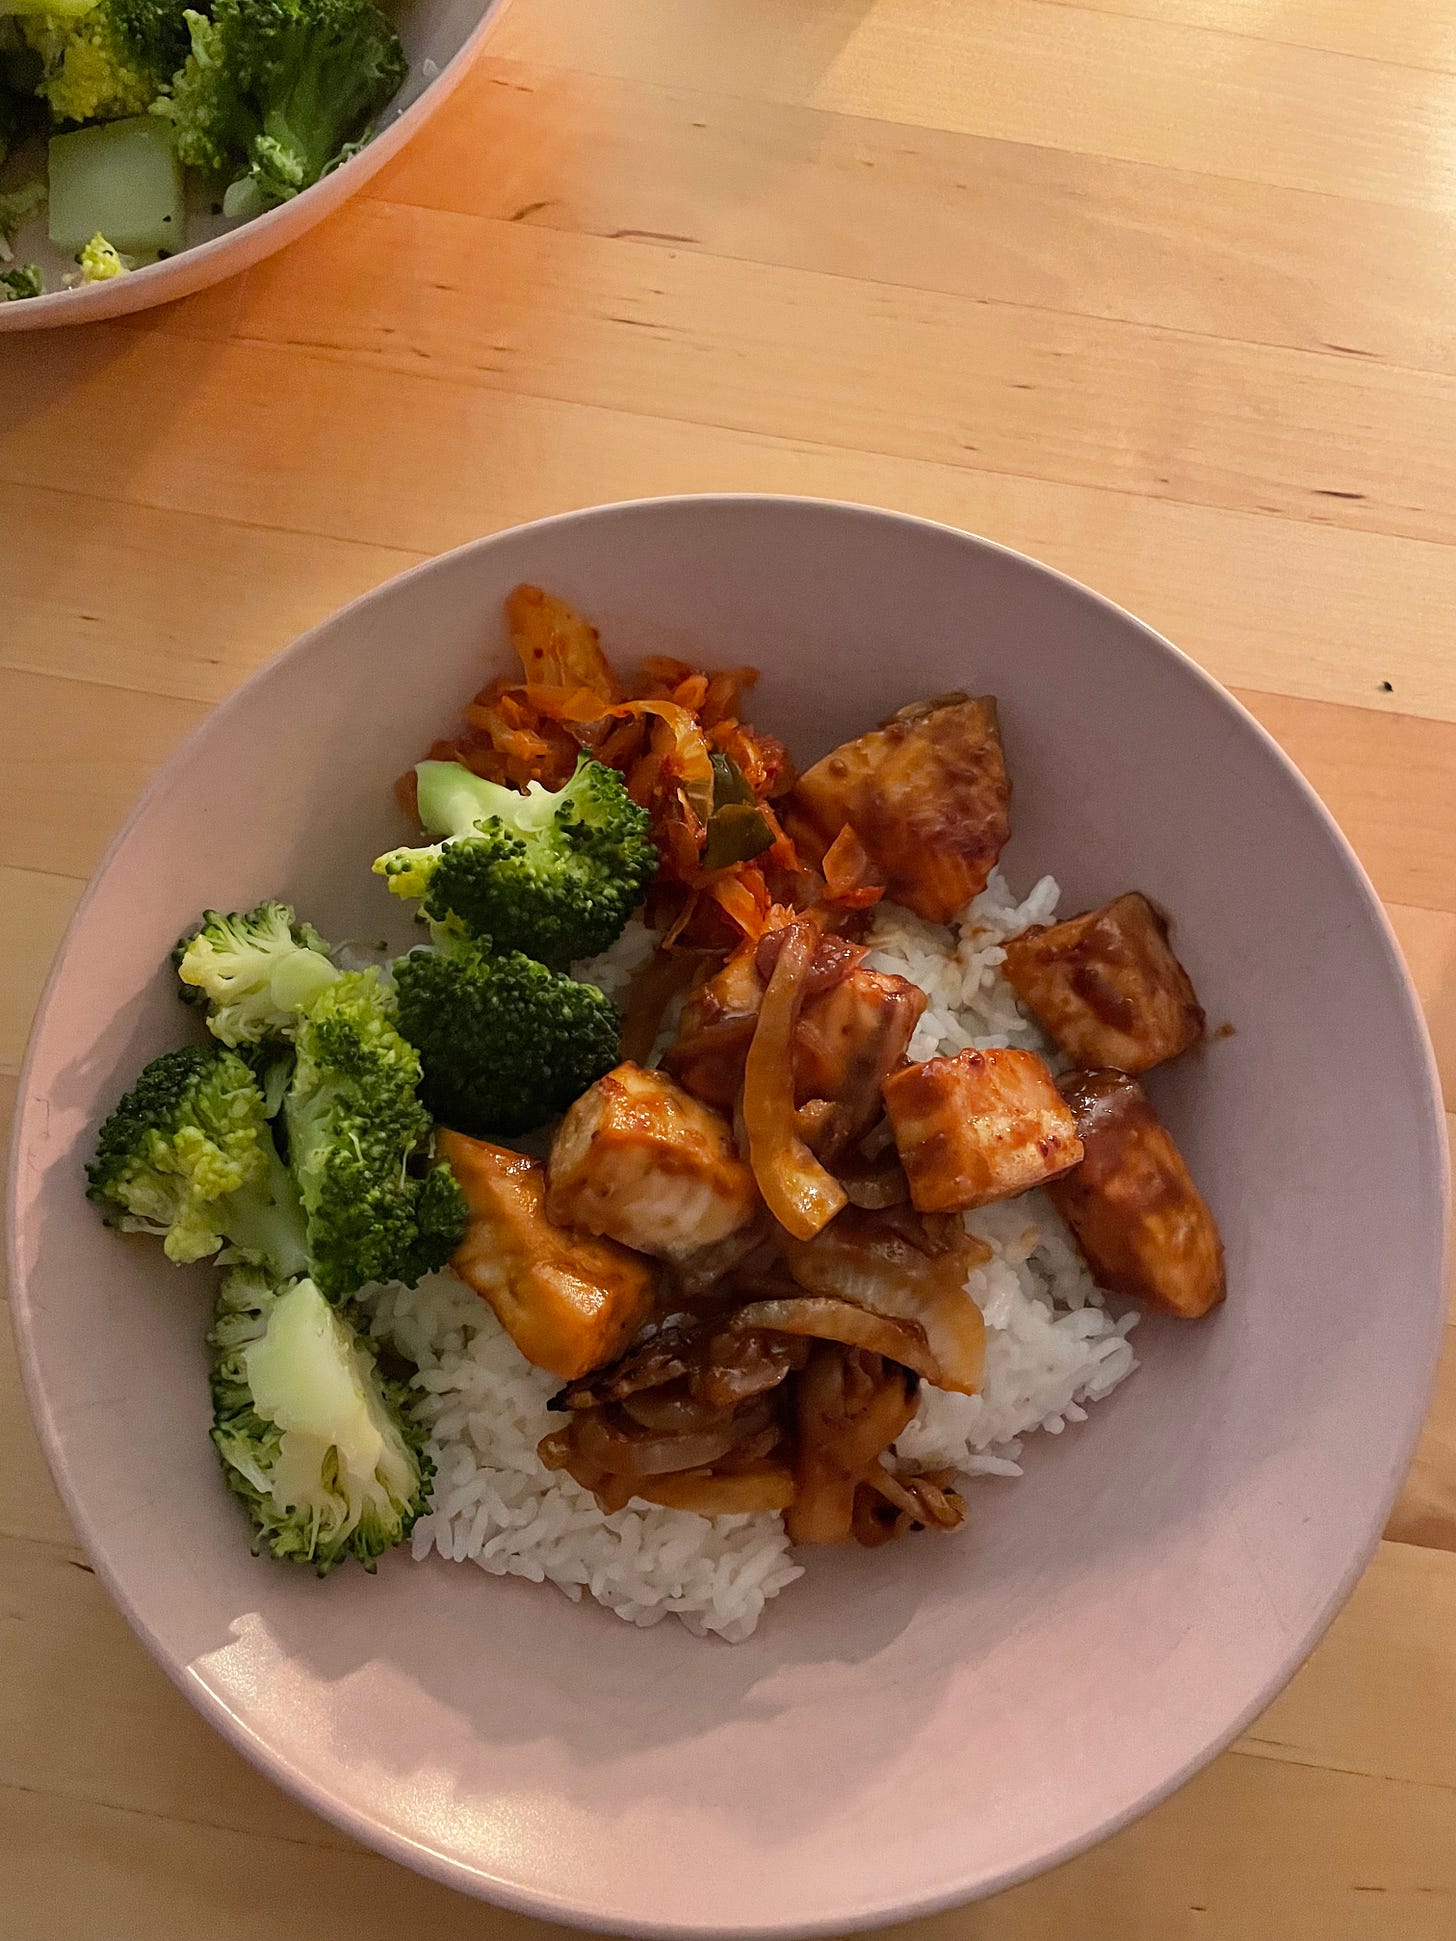 A pink bowl filled with rice, roasted cubes of salmon and steamed broccoli.